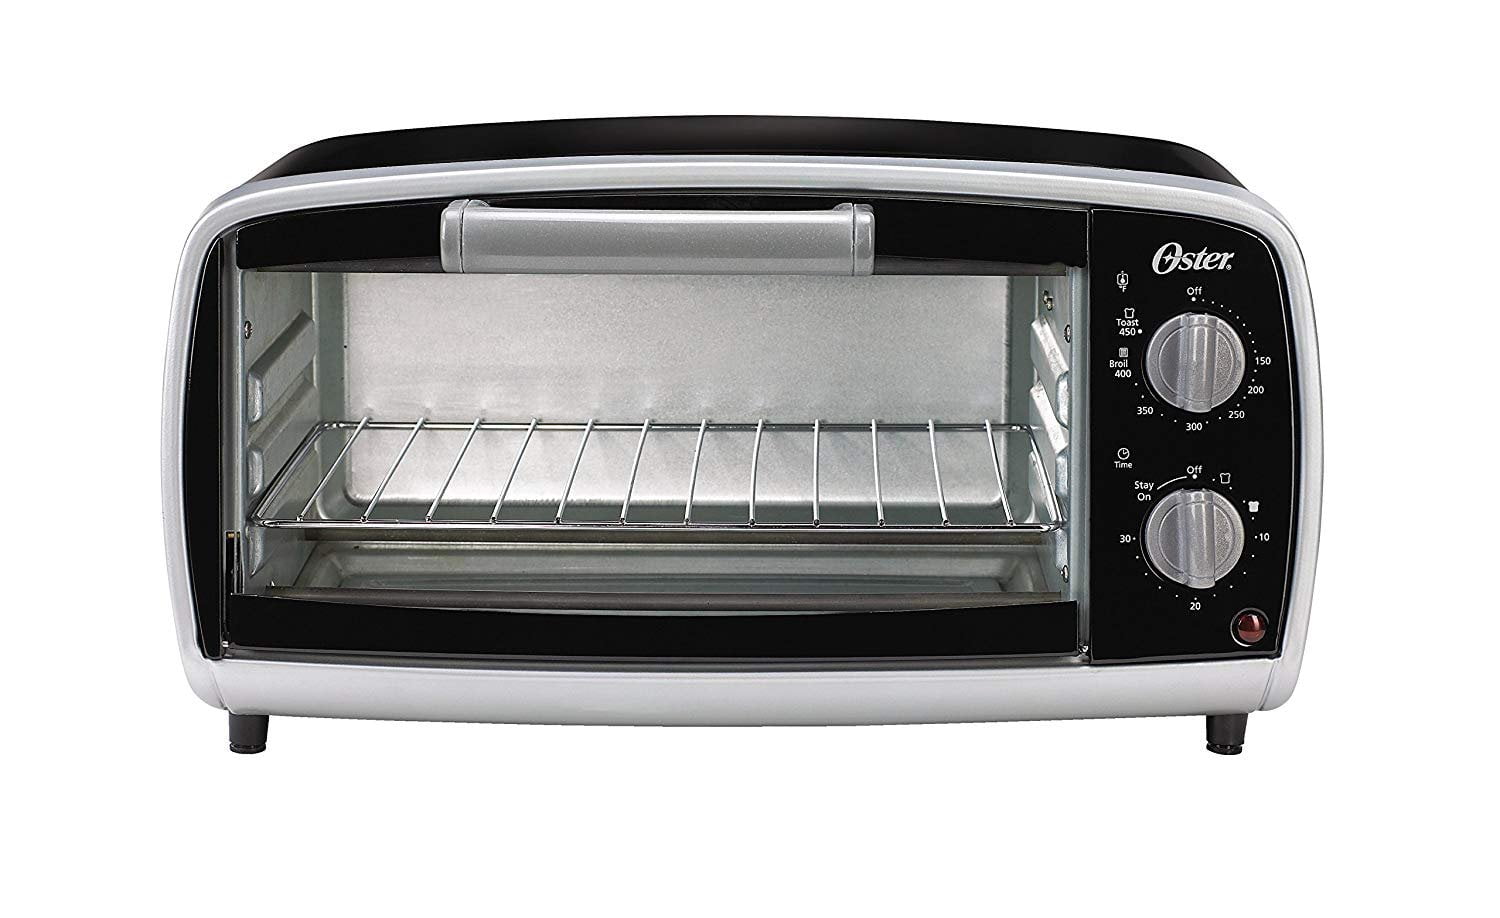 Oster Electric Oven 30 Liters Black